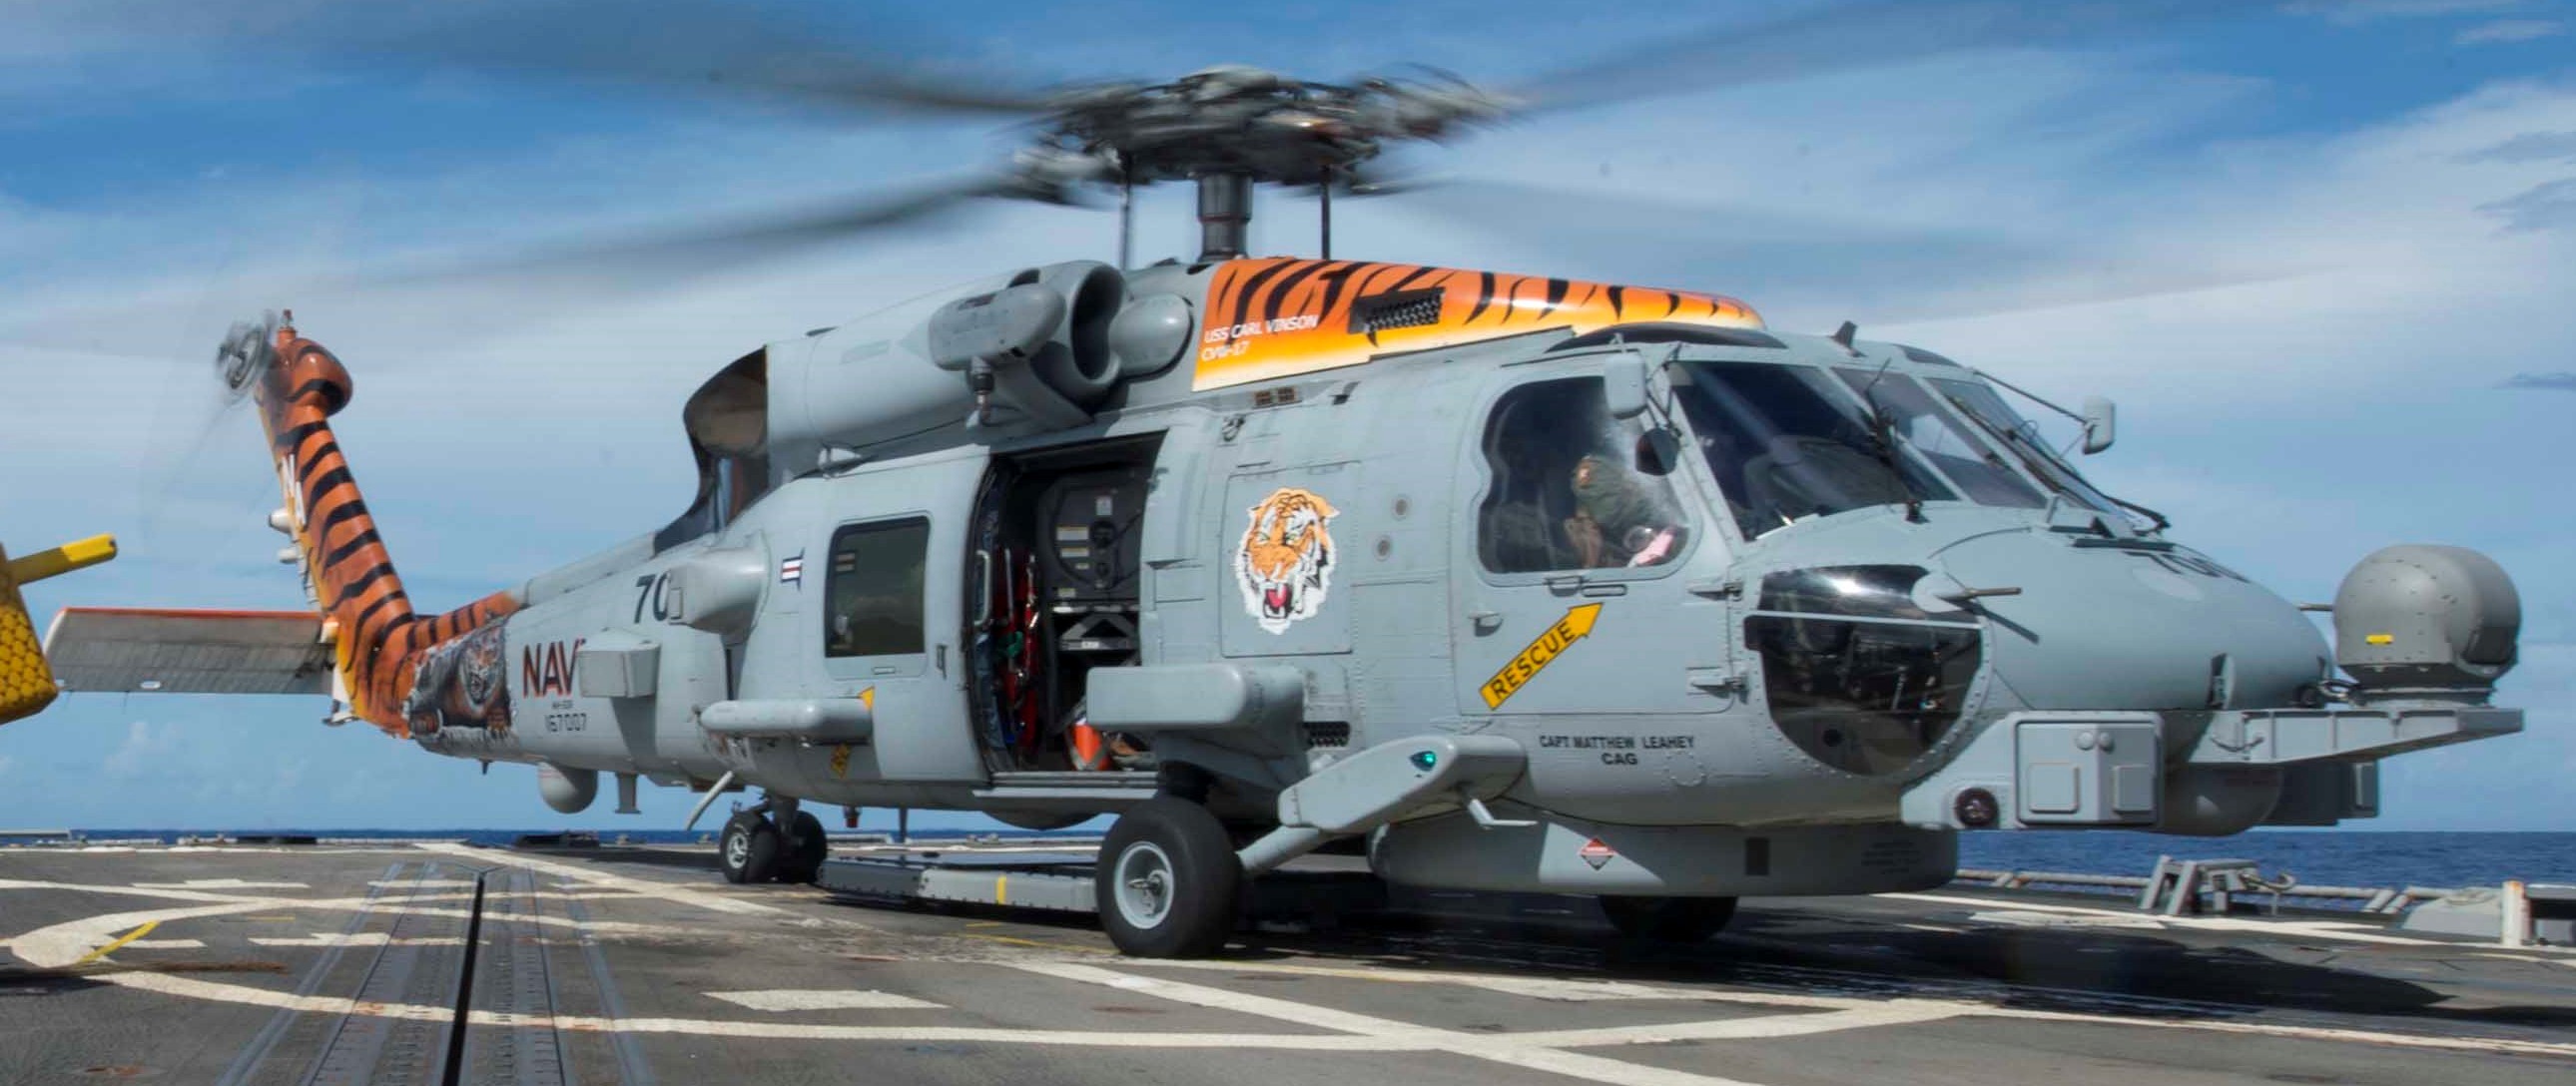 hsm-73 battlecats helicopter maritime strike squadron us navy mh-60r seahawk 2014 18